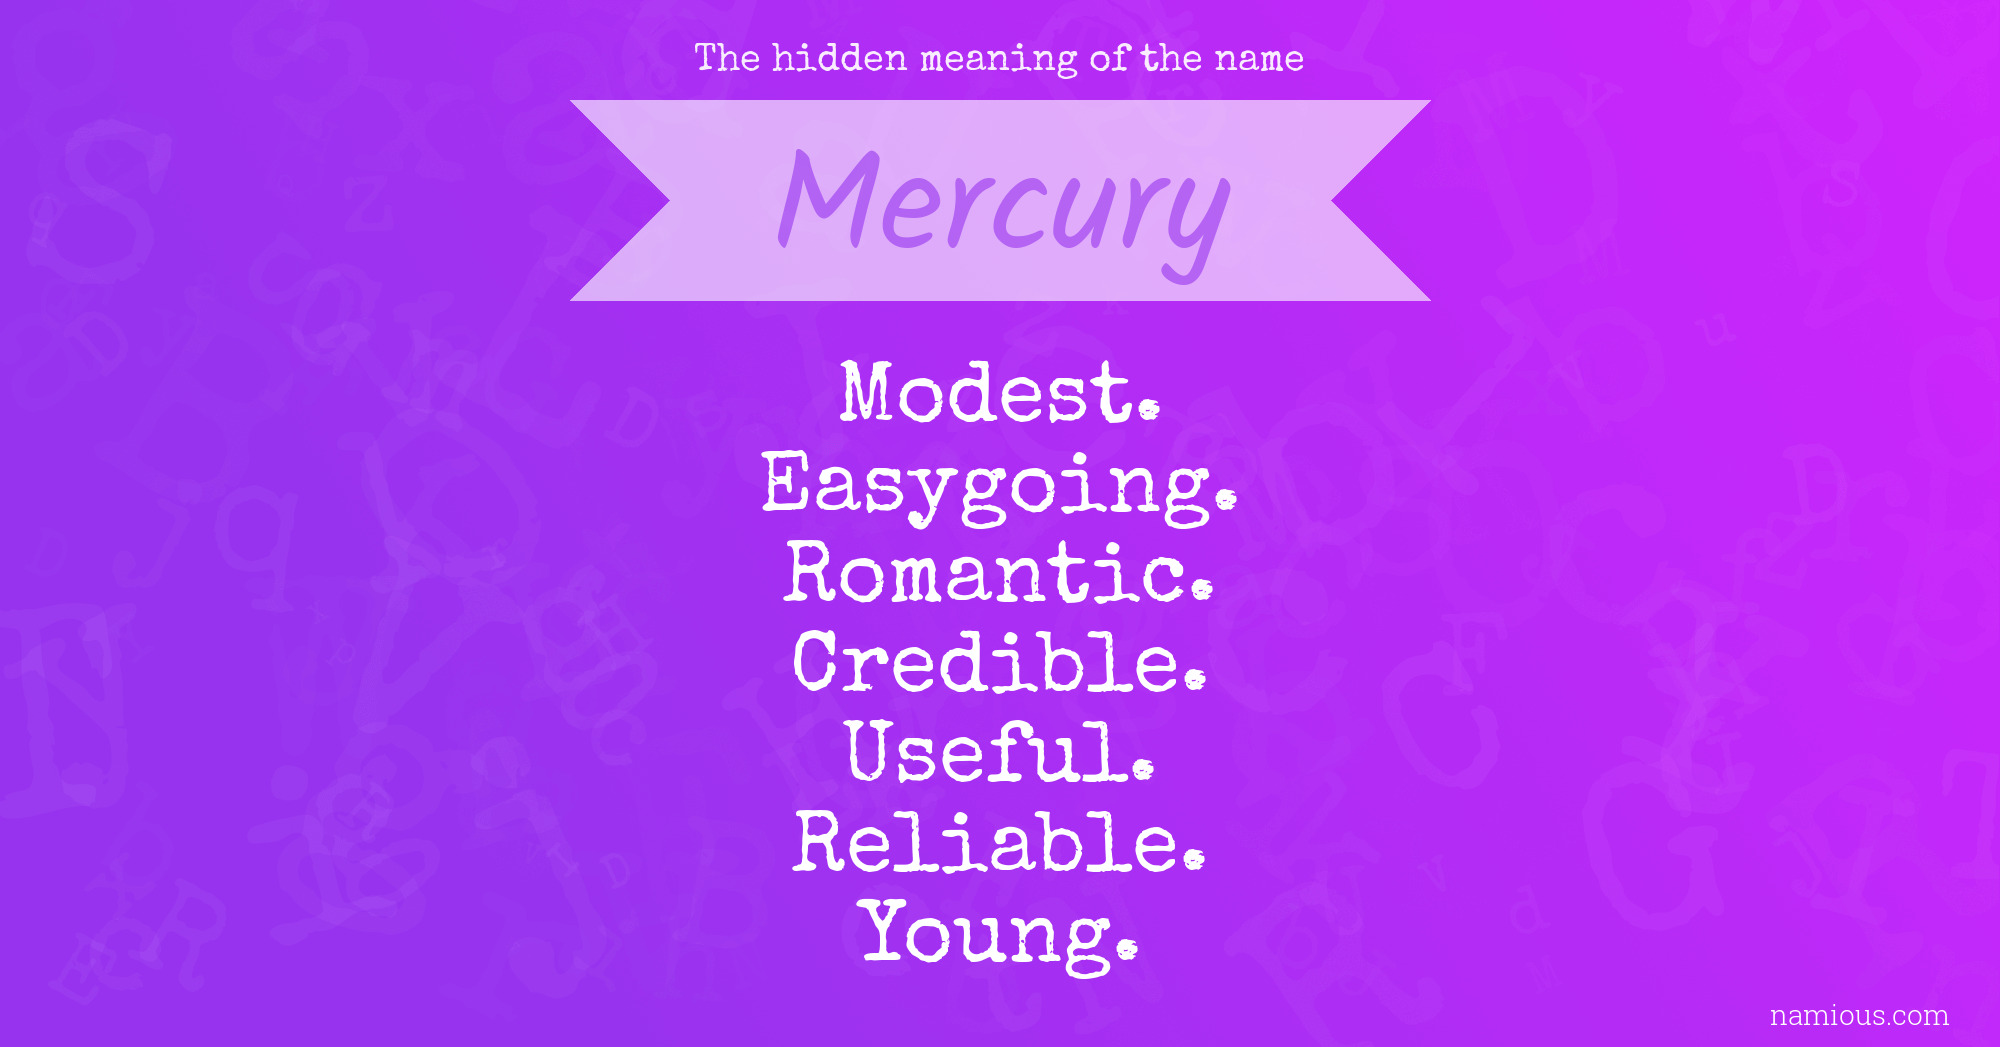 The hidden meaning of the name Mercury